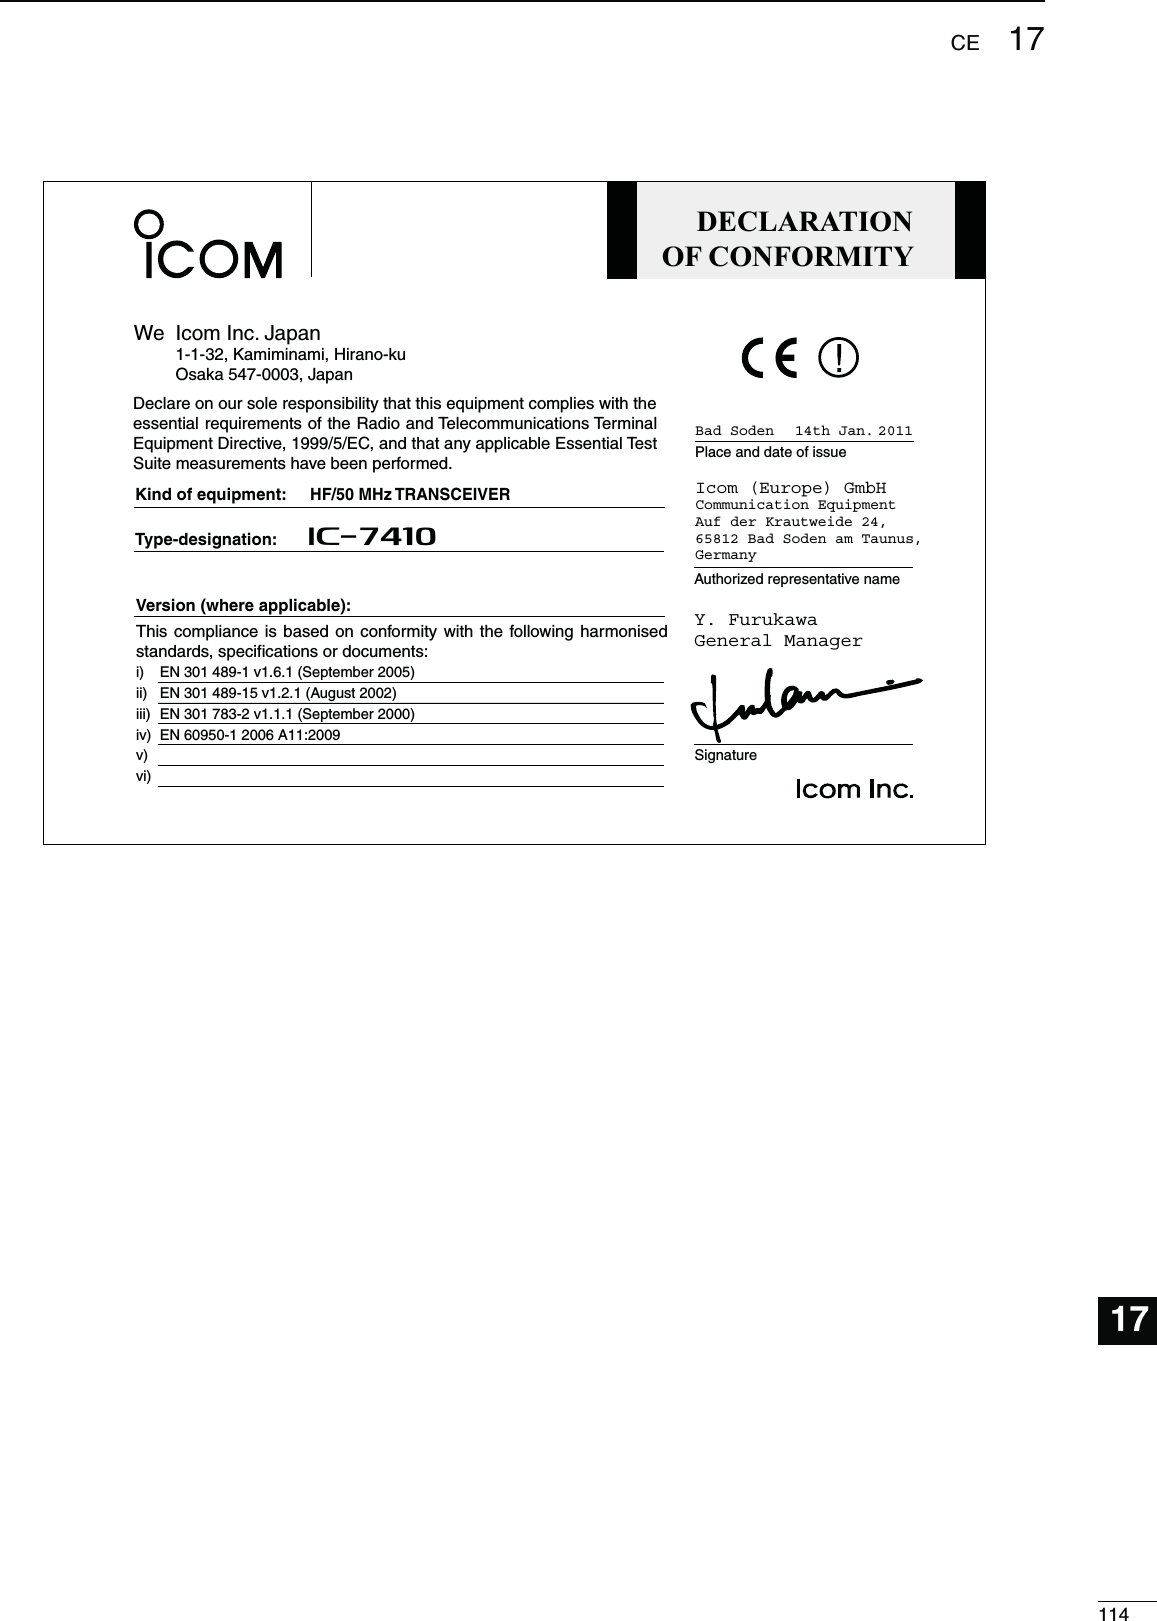 114CE12345678910111213141516181920211717DECLARATIONOF CONFORMITYWe Icom Inc. Japan1-1-32, Kamiminami, Hirano-kuOsaka 547-0003, JapanKind of equipment:Type-designation:SignatureAuthorized representative namePlace and date of issueVersion (where applicable): Y. FurukawaGeneral ManagerIcom (Europe) GmbHCommunication EquipmentAuf der Krautweide 24,65812 Bad Soden am Taunus,GermanyHF/50 MHz TRANSCEIVERiC- 741014th Jan. 2011Bad SodenDeclare on our sole responsibility that this equipment complies with the essential requirements of the Radio and Telecommunications Terminal Equipment Directive, 1999/5/EC, and that any applicable Essential Test Suite measurements have been performed.This compliance is based on conformity with the following harmonised standards, specifications or documents:EN 301 489-1 v1.6.1 (September 2005)EN 301 489-15 v1.2.1 (August 2002) EN 301 783-2 v1.1.1 (September 2000)  EN 60950-1 2006 A11:2009 i)ii)iii) iv)v) vi) 